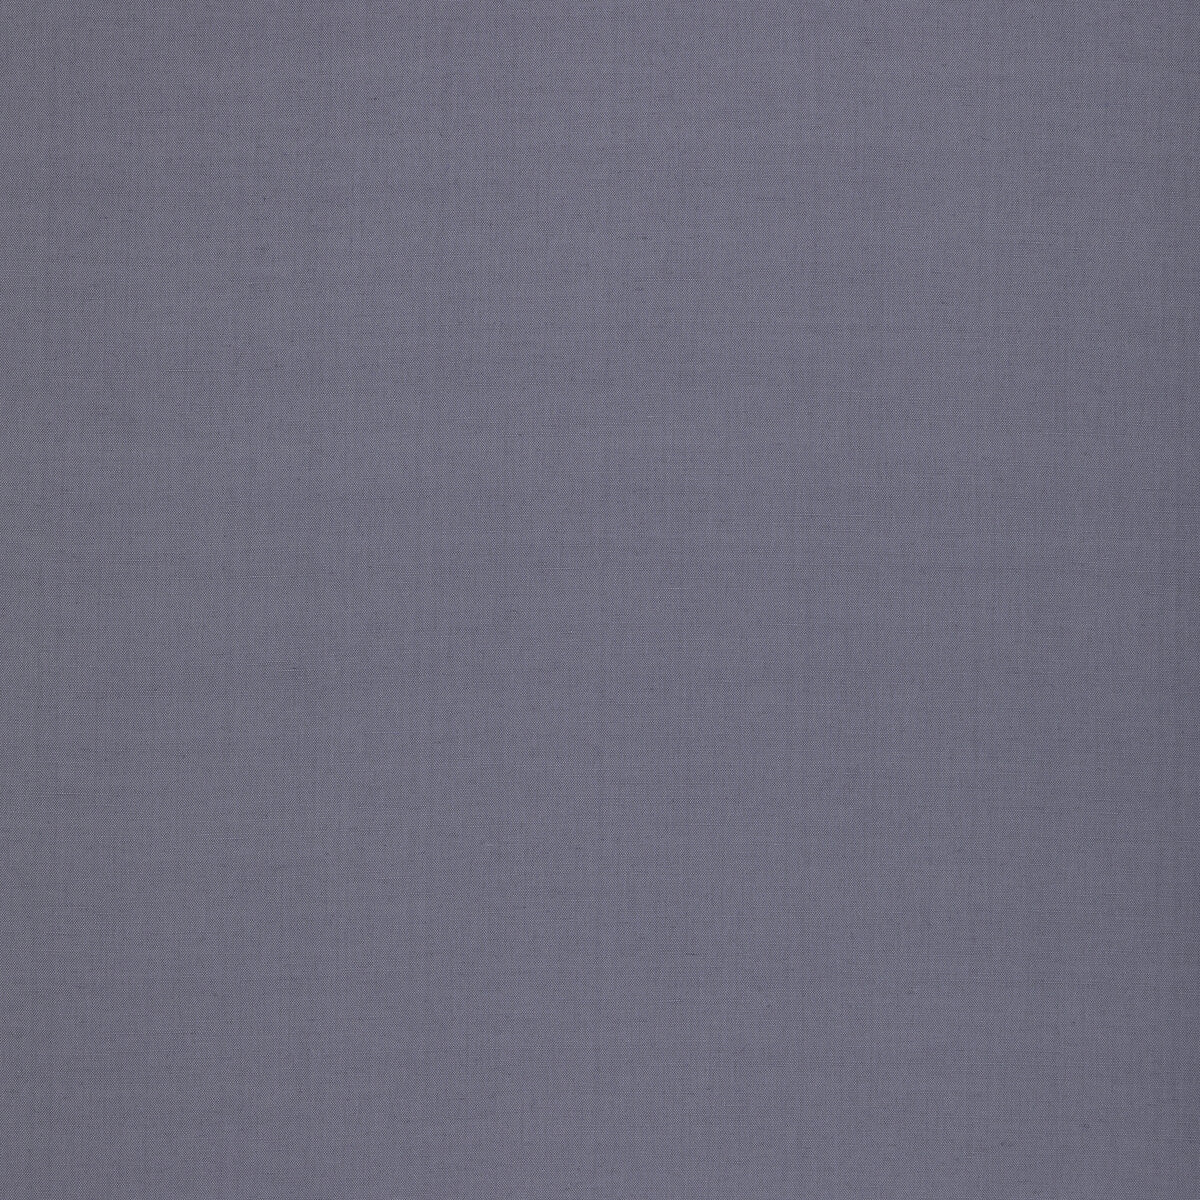 Kemble fabric in soft blue color - pattern BF11046.605.0 - by G P &amp; J Baker in the Baker House Plain &amp; Stripe II collection